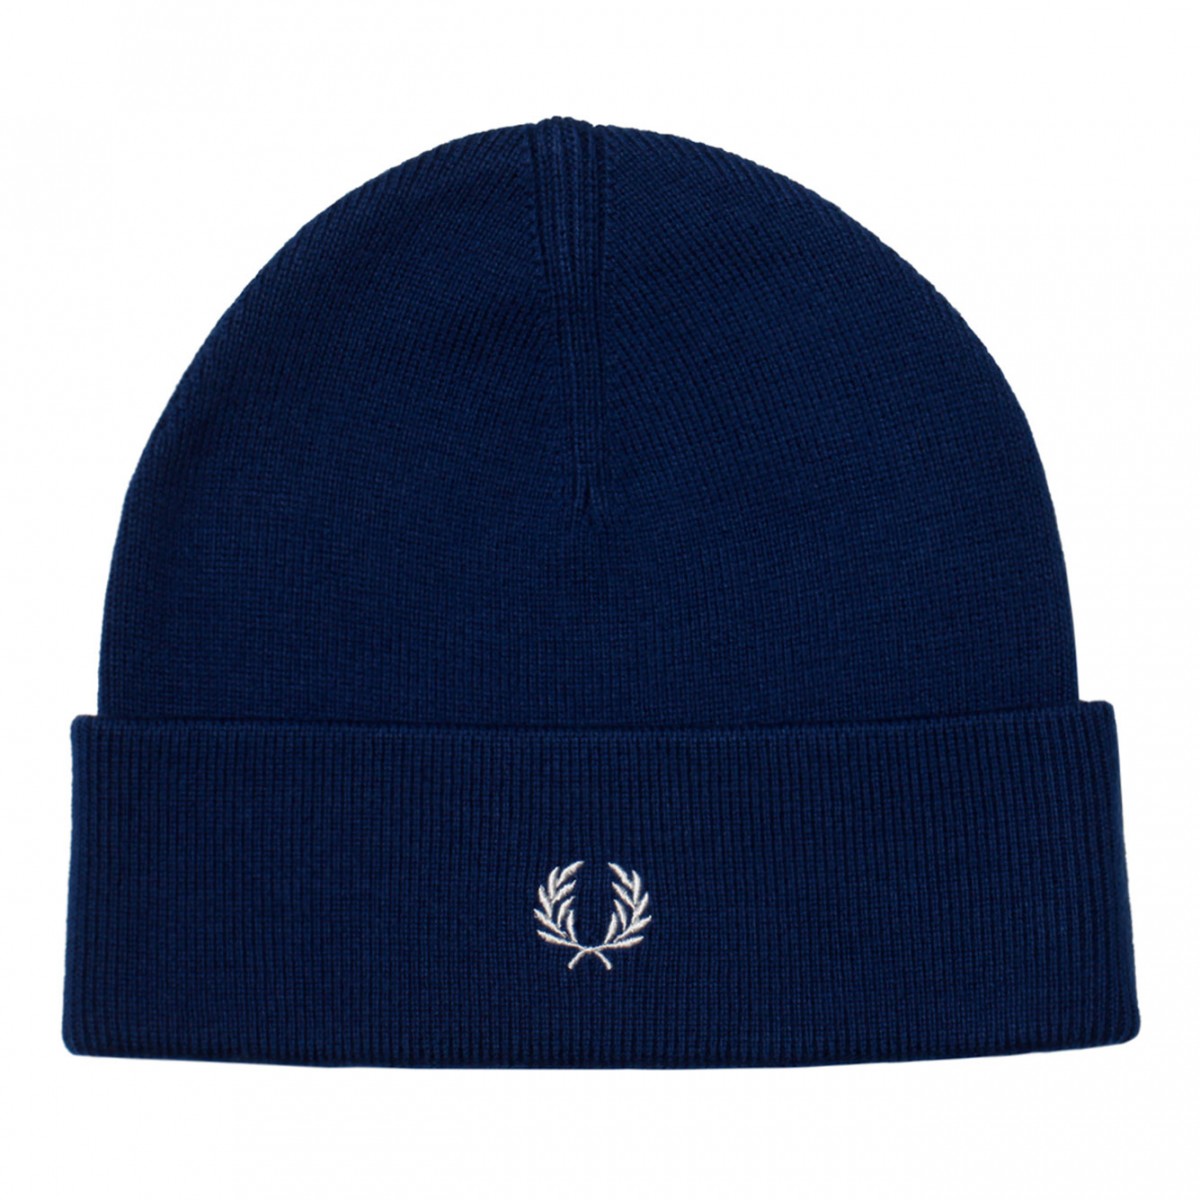 Navy Wool Logo Embroidered Knitted Beanie